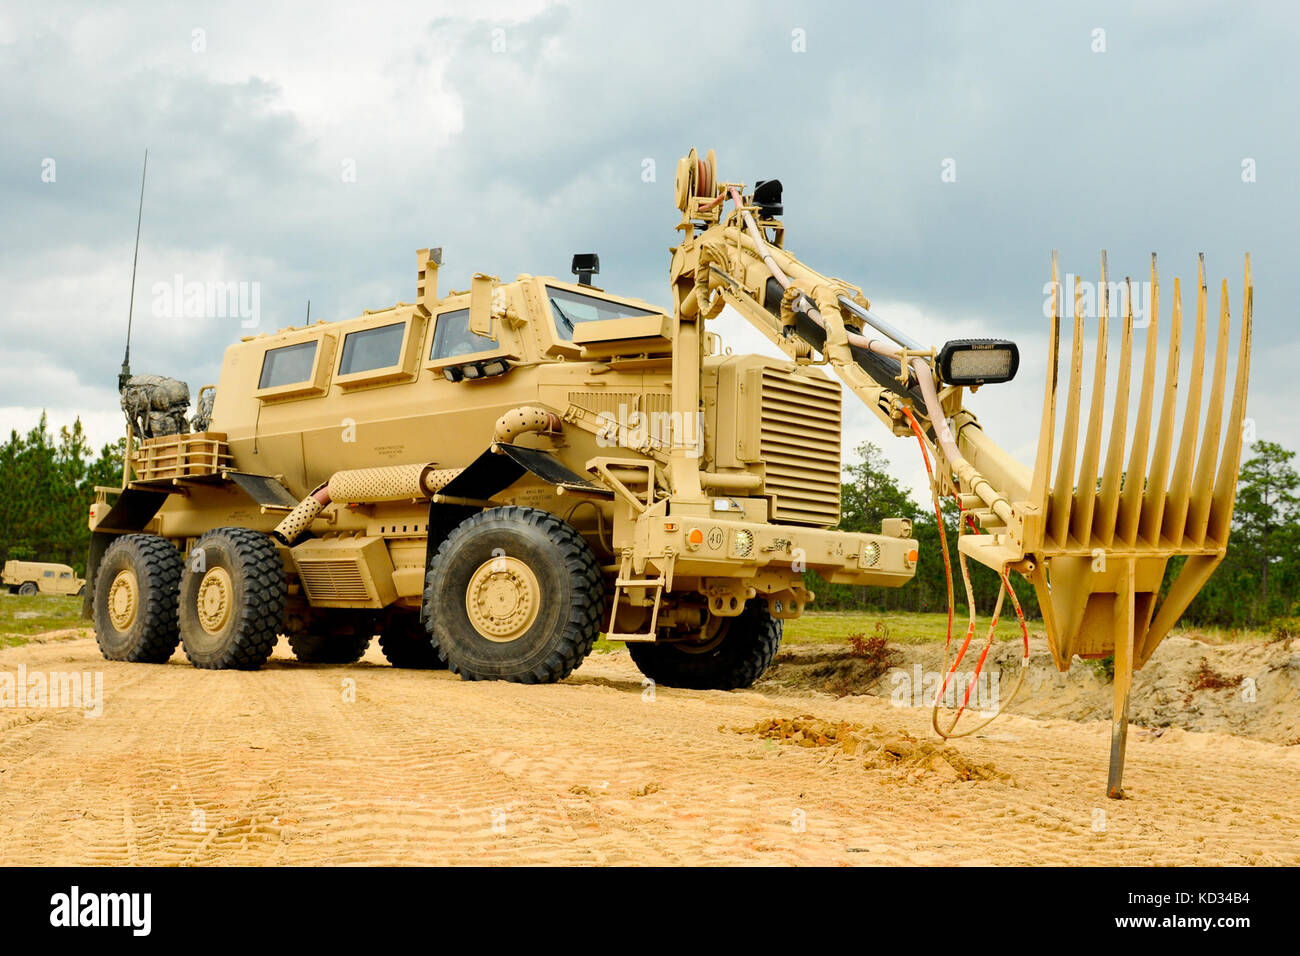 A U.S. Army Buffalo explosive device detection vehicle, assigned to Stock  Photo - Alamy